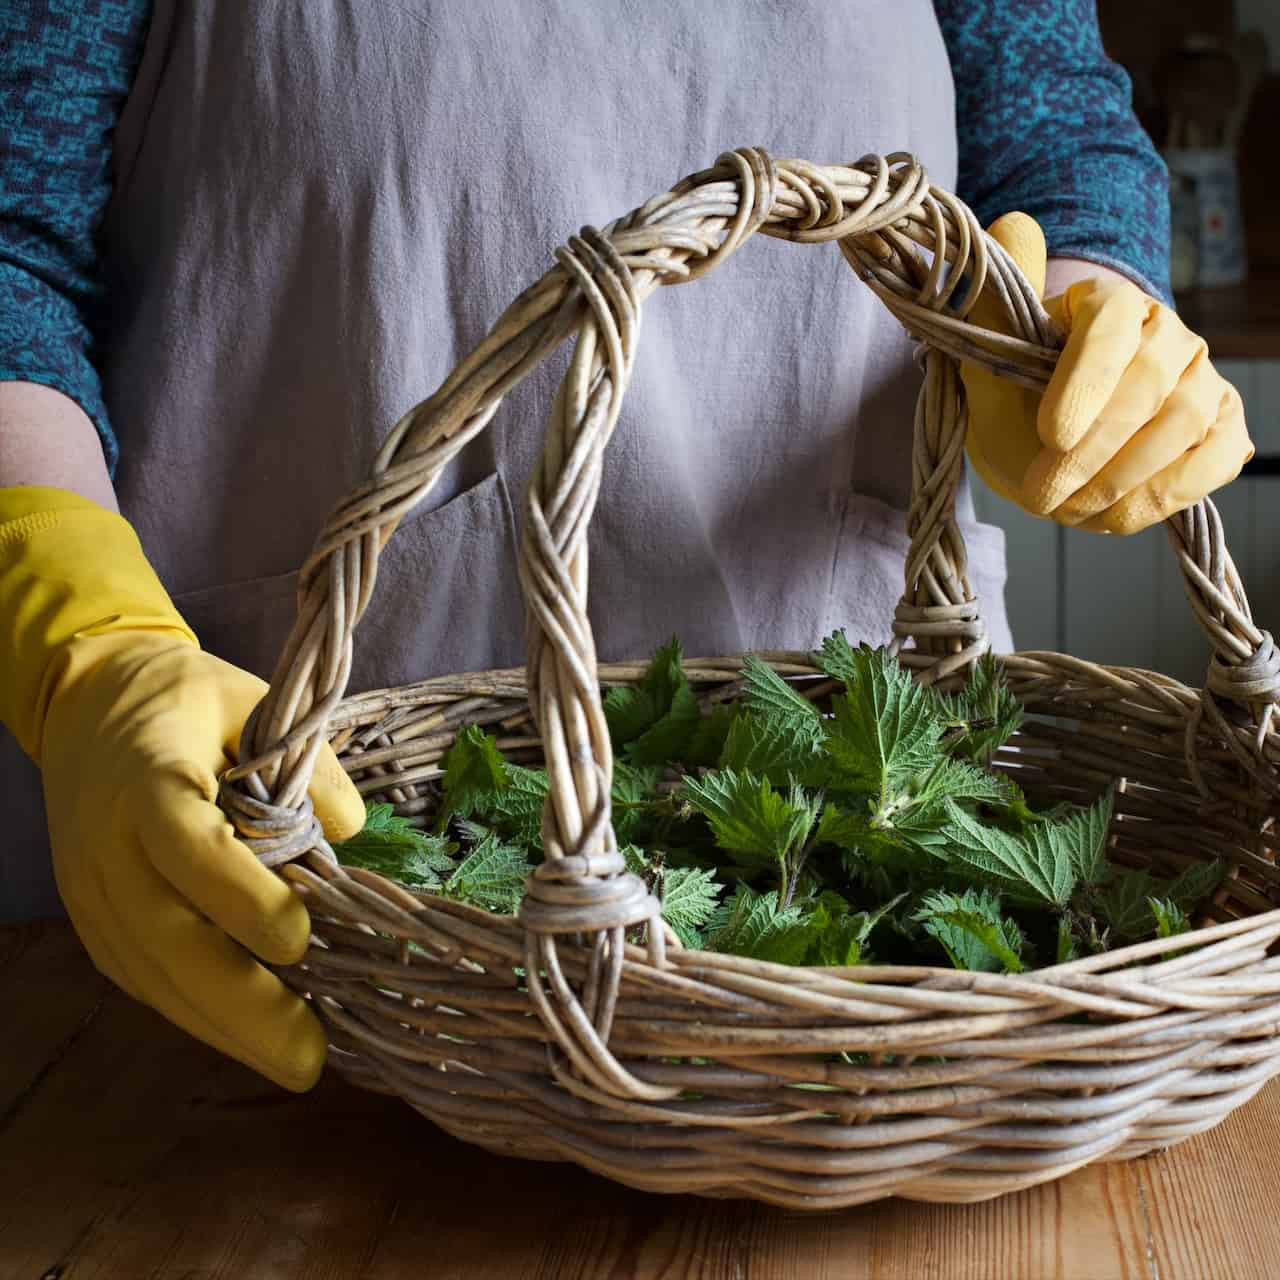 Woman earring bright yellow washing up gloves holding a wicker basket of fresh stinging nettles